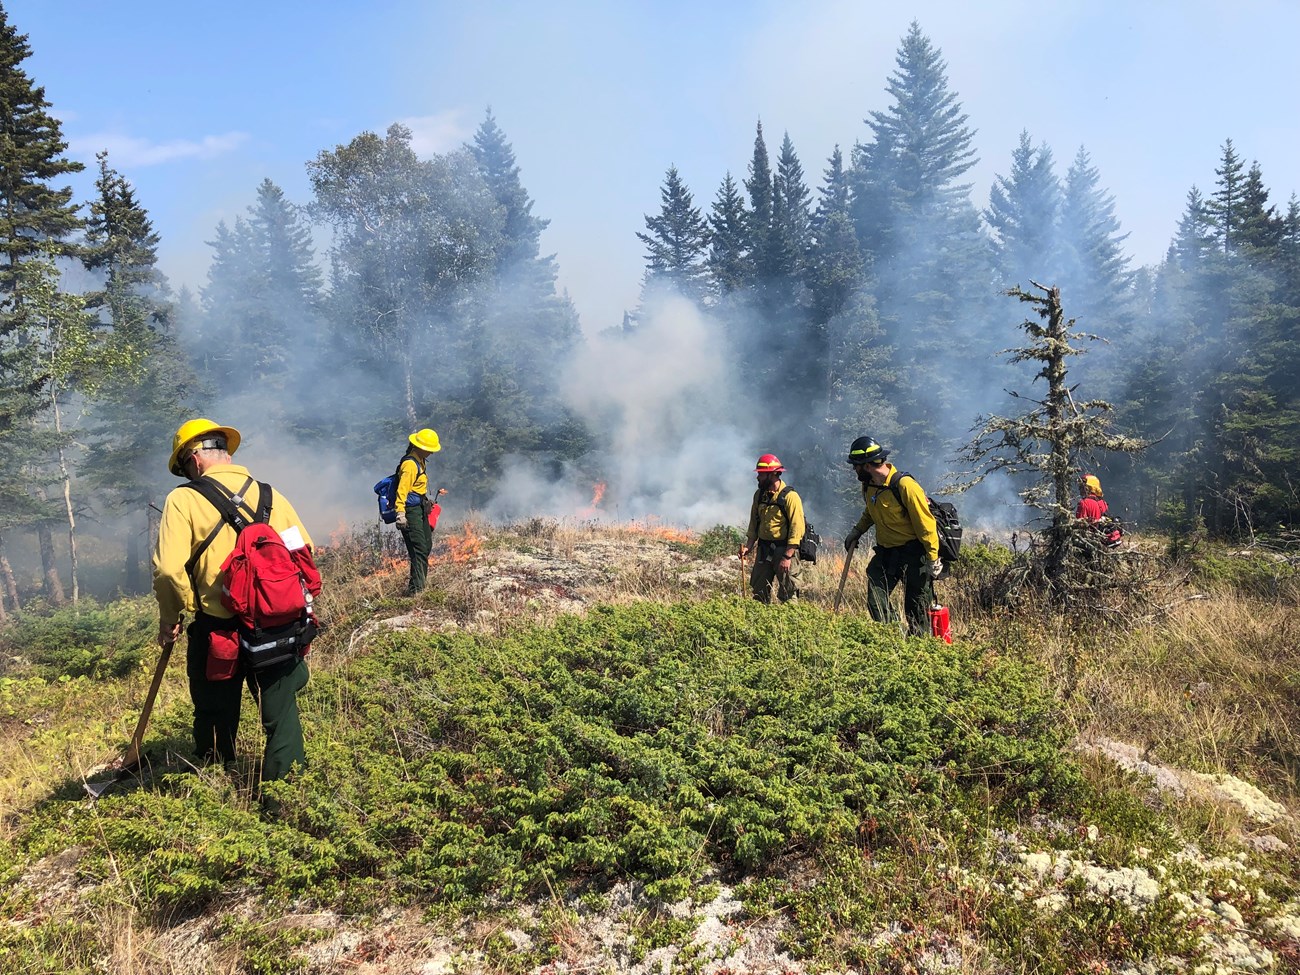 A team of five wildland firefighters wearing hard hats, yellow shirts, and green pants, work to manage a small ground fire smoldering in the brush.